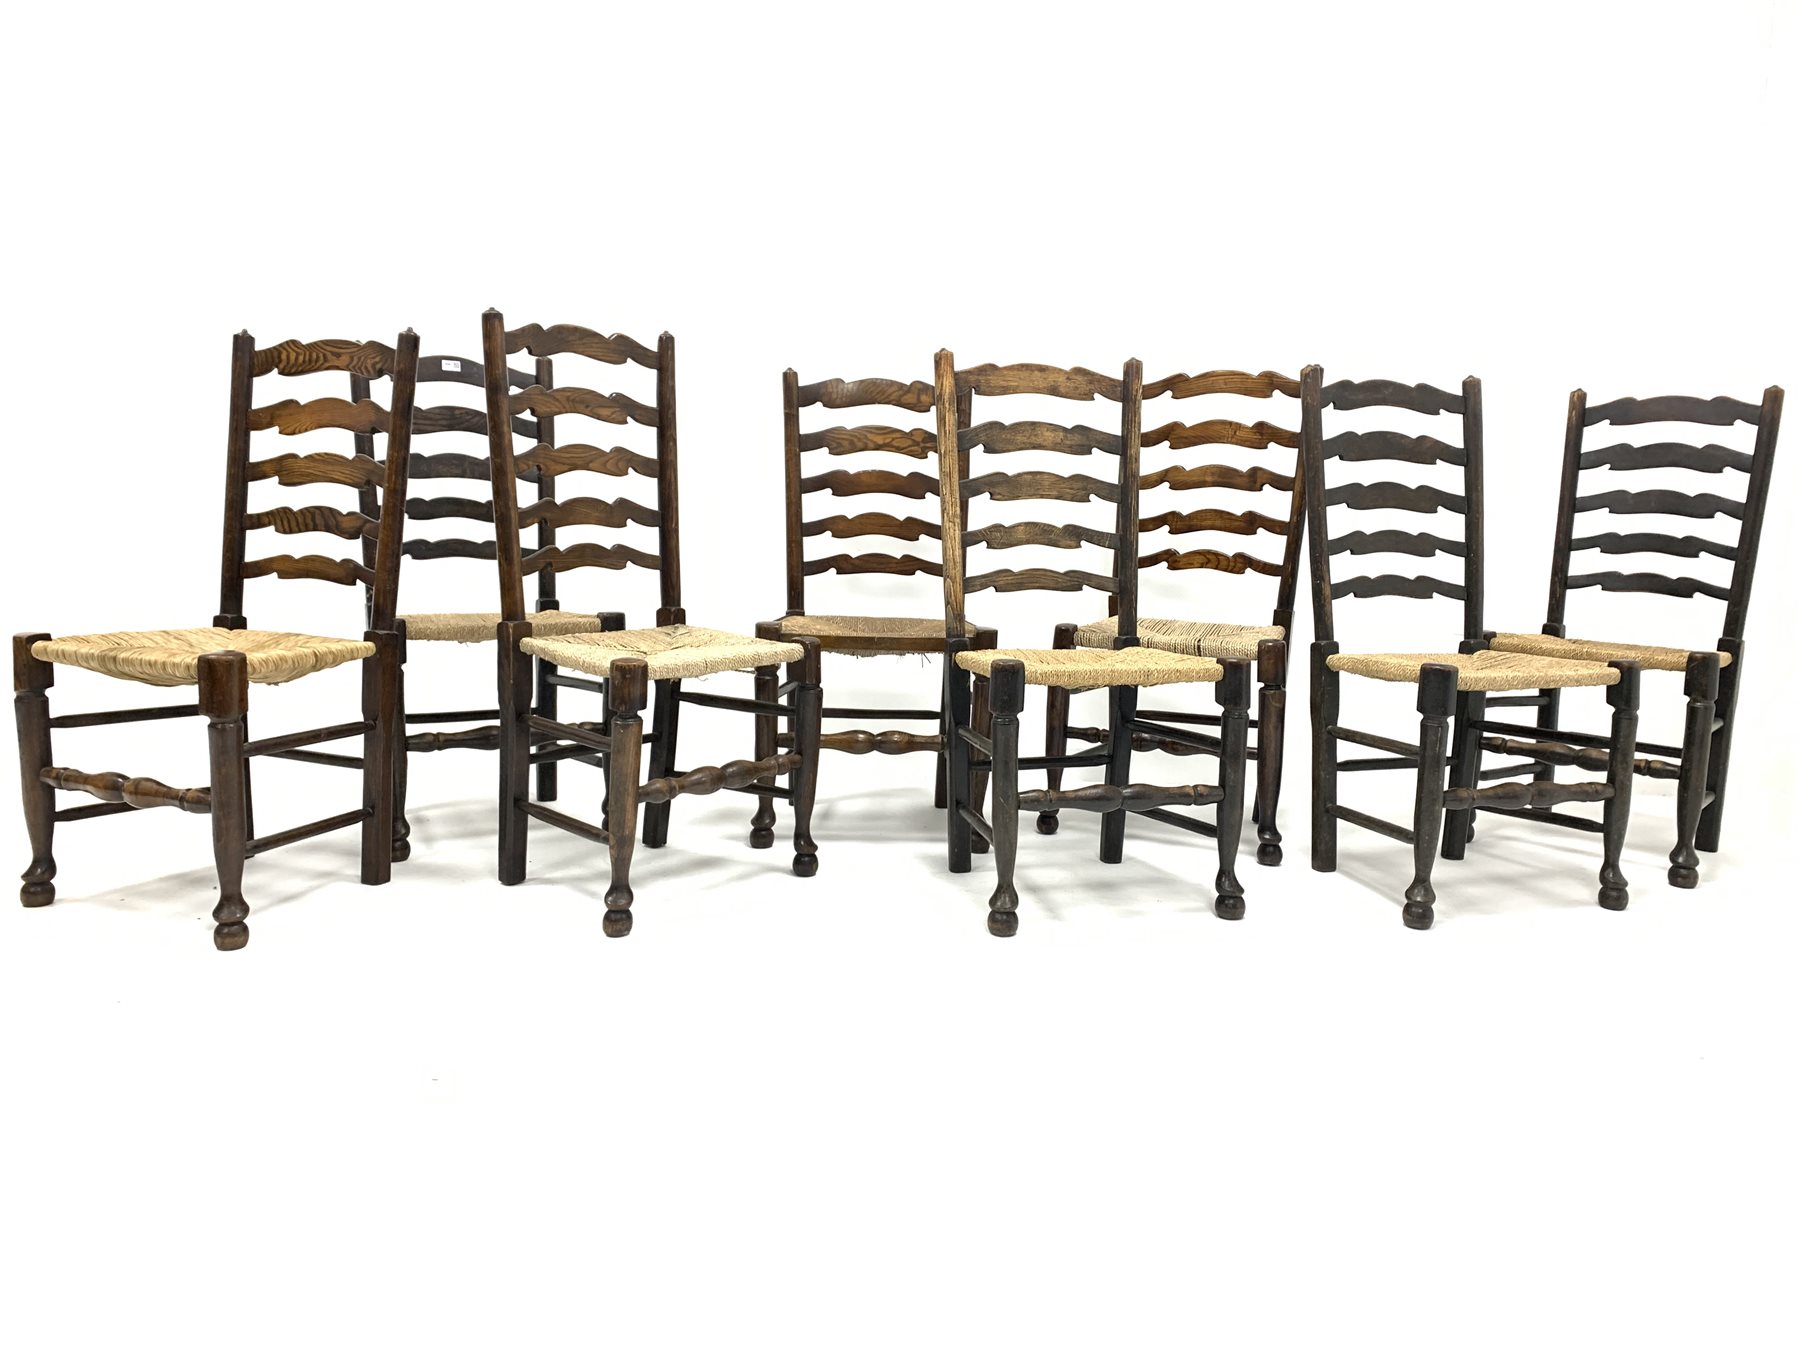 Harlequin set of eight 19th century oak ladder back chairs, with rush seats and turned supports, W49